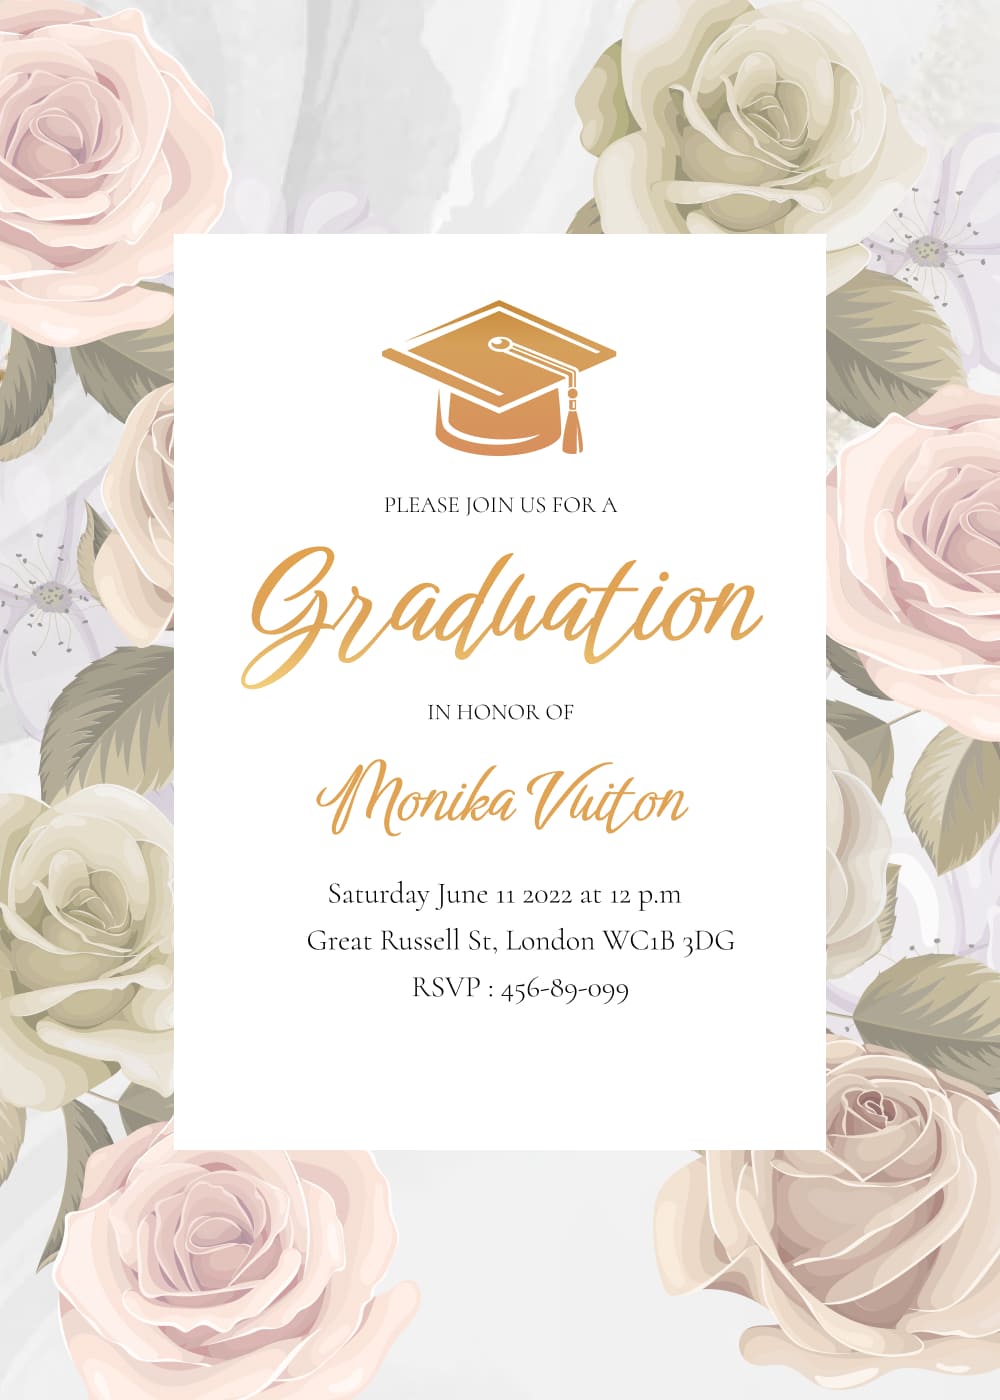 Graduation invite template with blossom flowers.